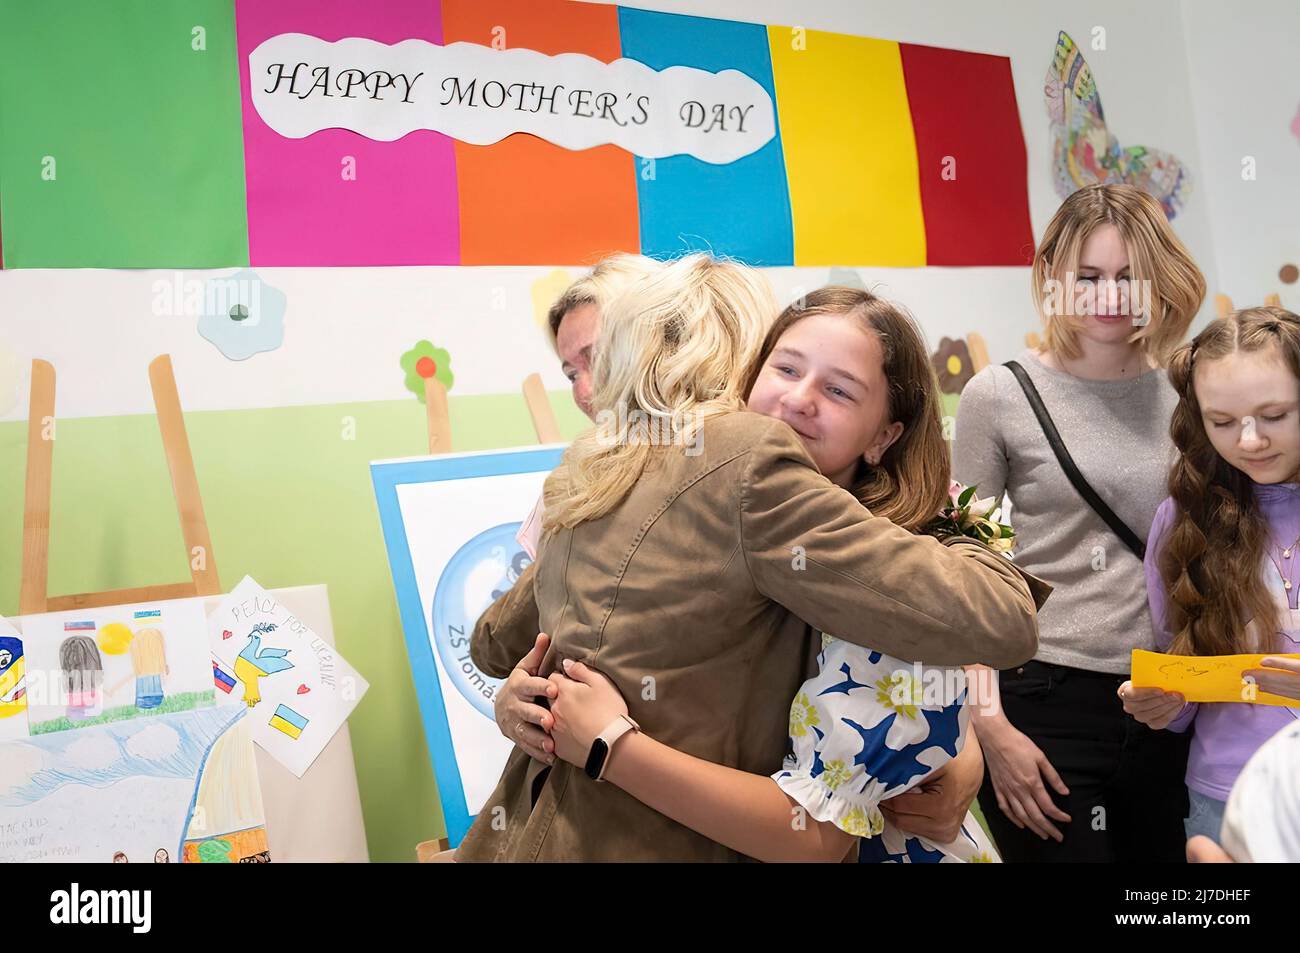 The First Lady of the United States, Dr. Jill Biden, travelled to war torn Ukraine where she met with Ukraine First Lady Olena Zelenska at a school in Uzhhorod. The First Ladies hugged and met students and staff at the school. The school has converted to a temporary shelter for families fleeing the war zone. Stock Photo